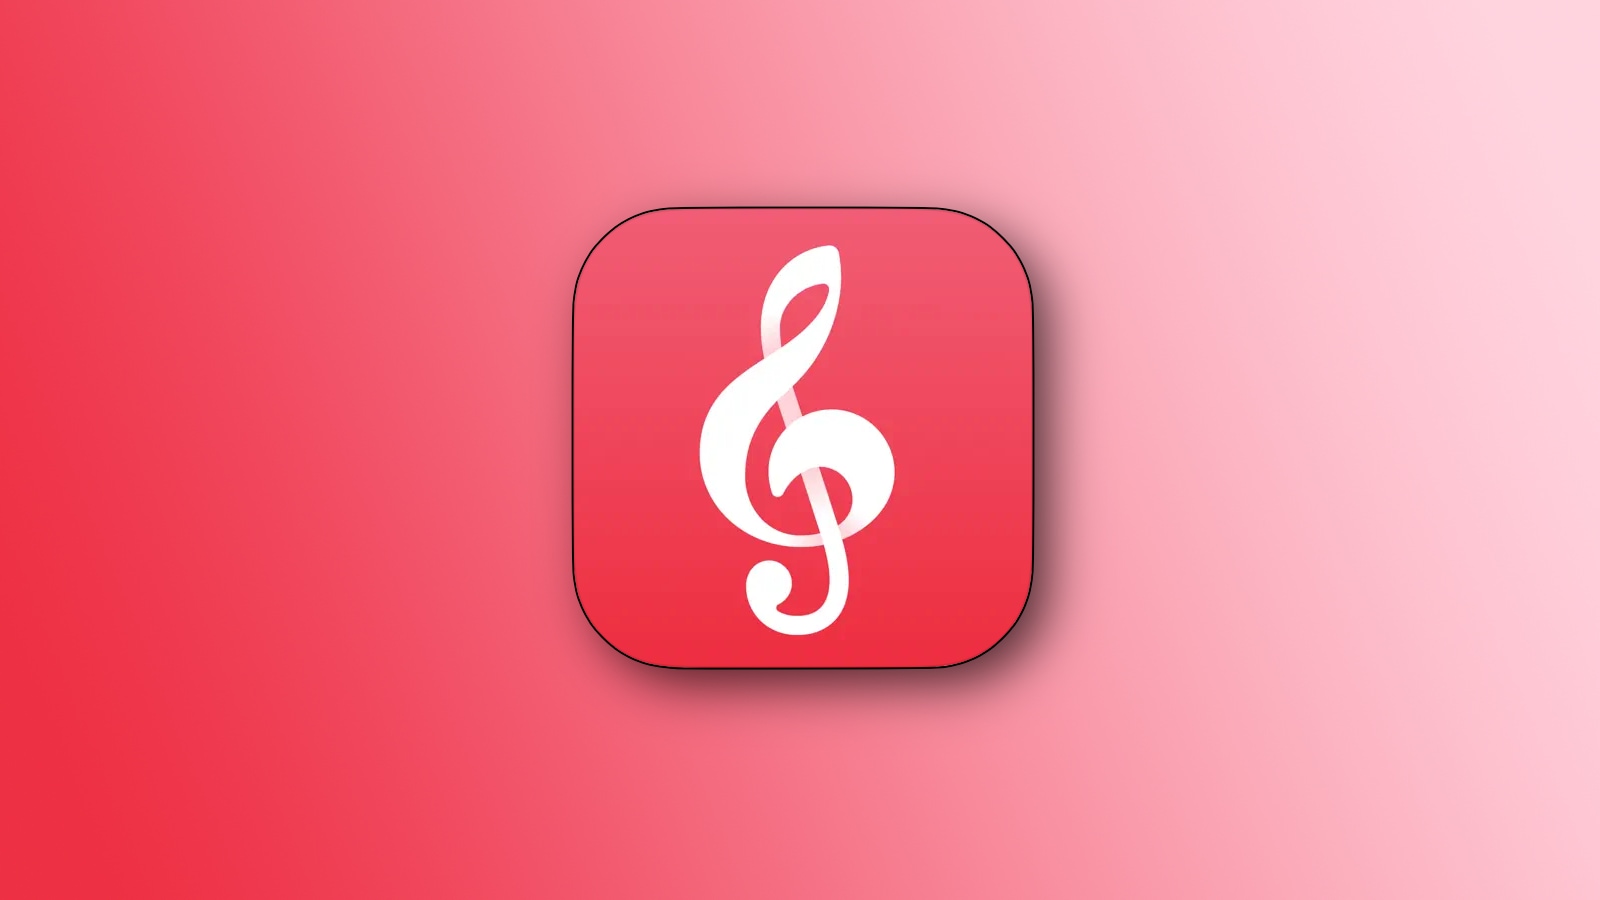 Apple Music Classical launches on Android